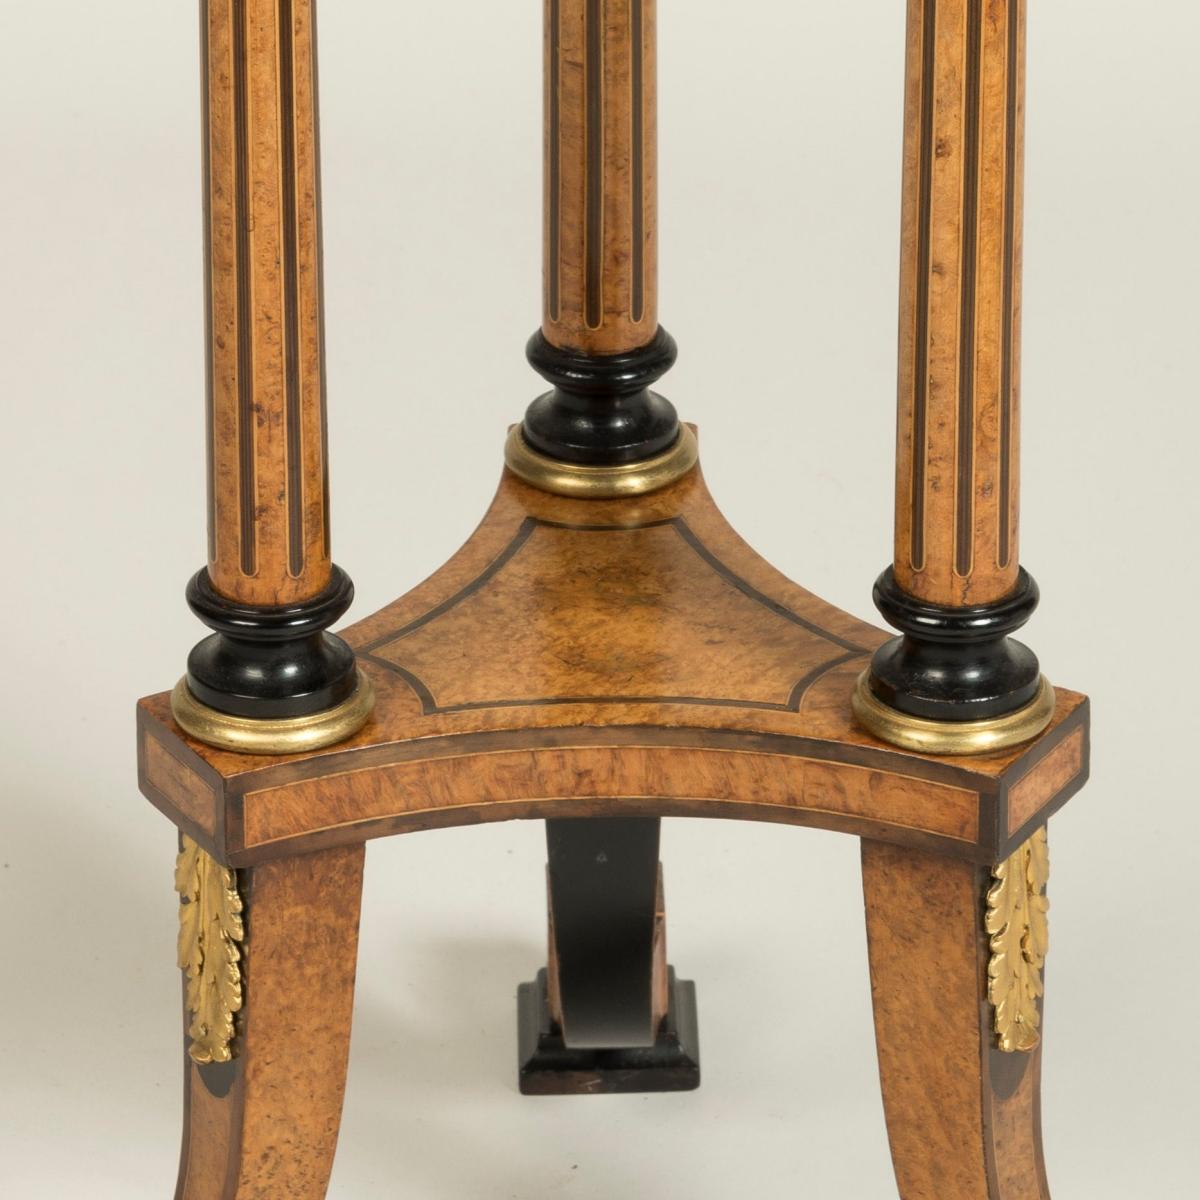 A Refined Occasional Tripod Table In the Manner of Jackson & Graham